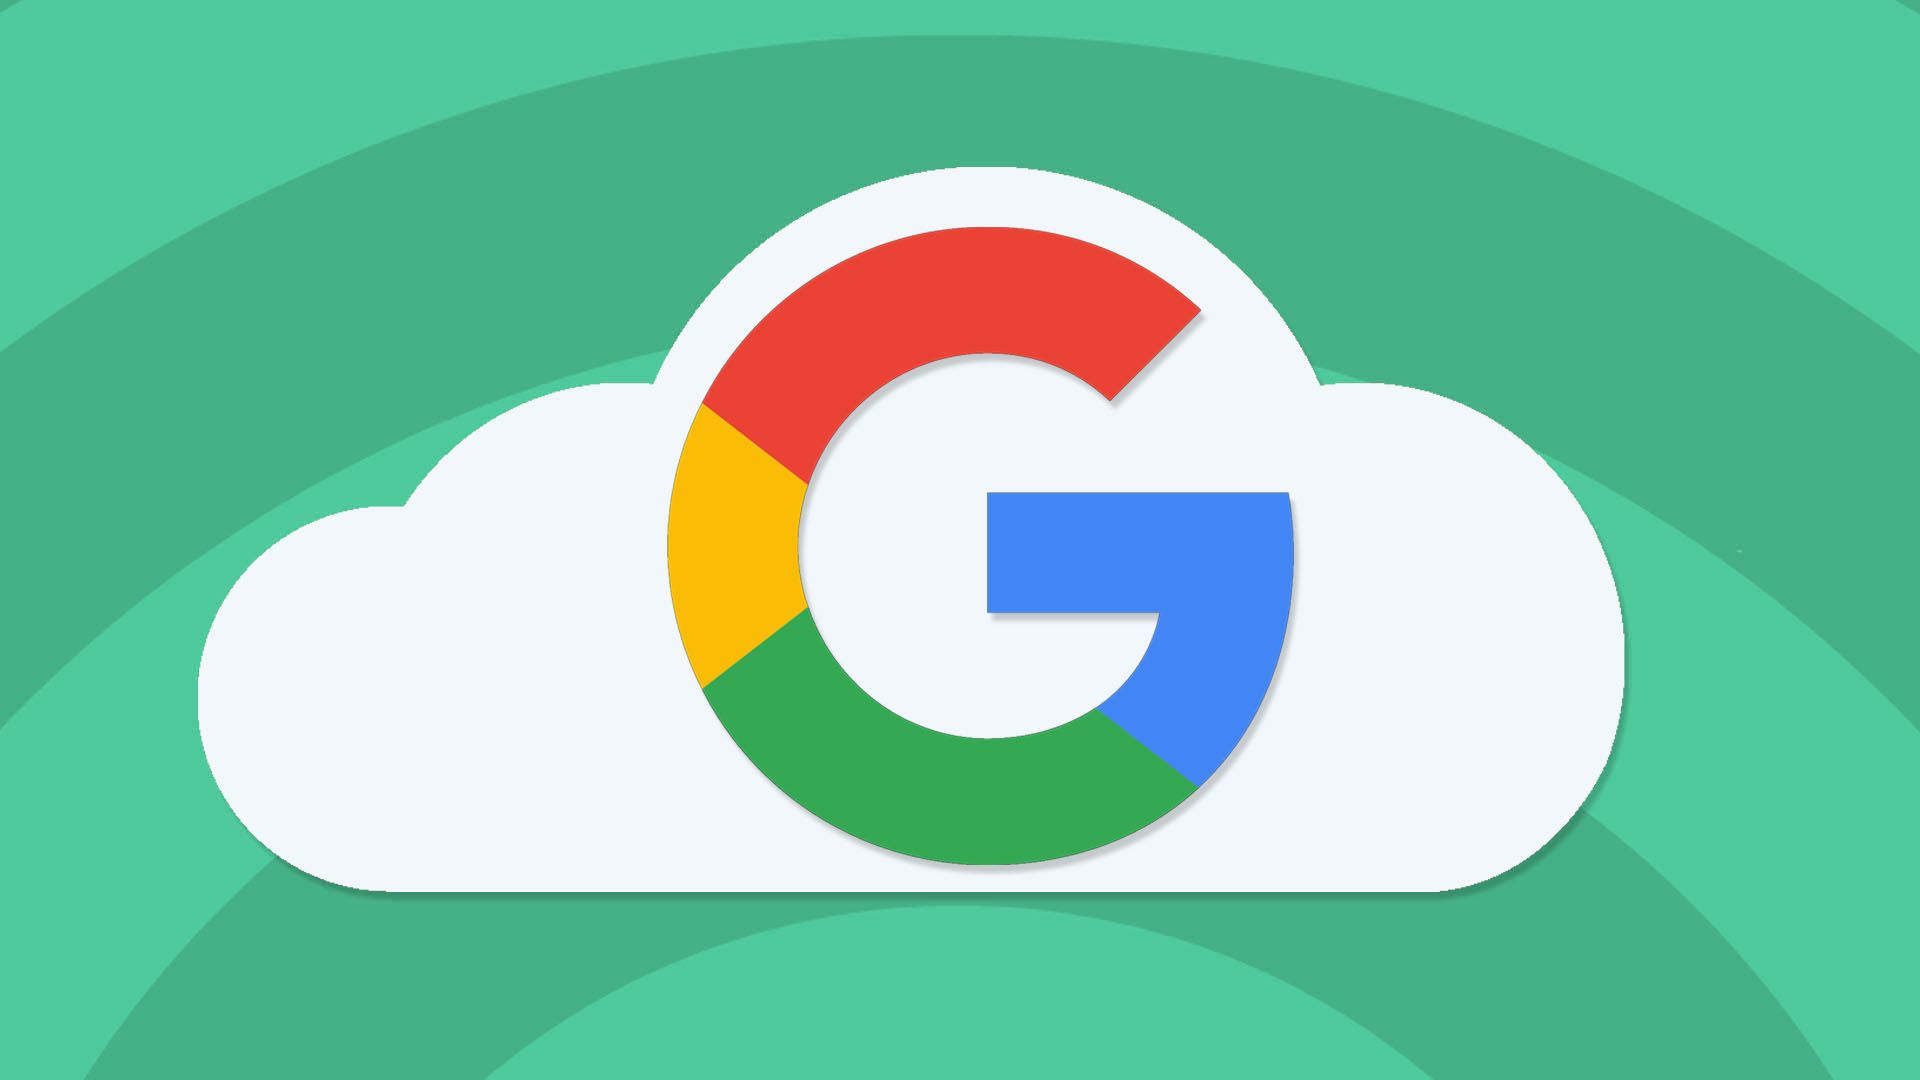 Google’s mobile weather forecast got its first redesign in 7 years